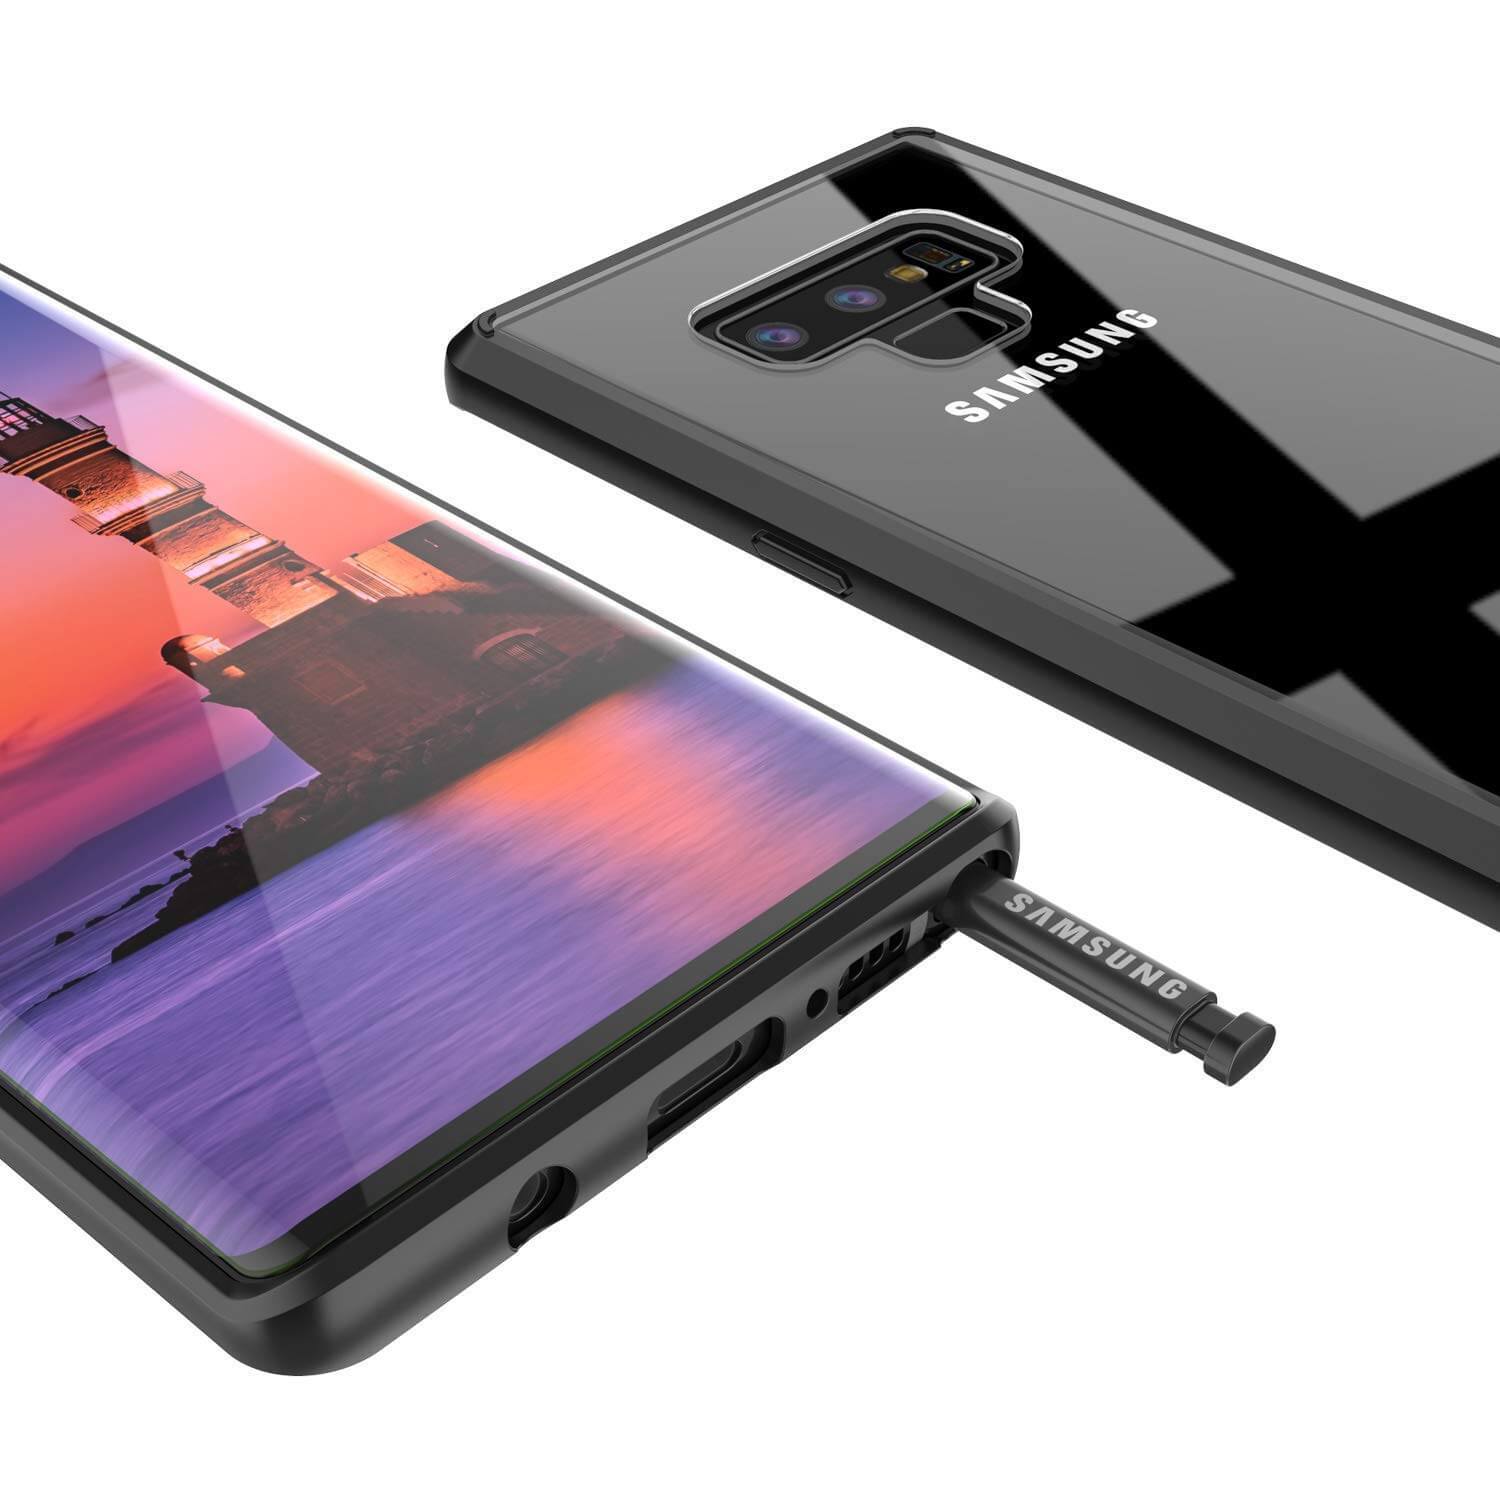 Galaxy Note 9 Case, PUNKcase [LUCID 2.0 Series] [Slim Fit] Armor Cover W/Integrated Anti-Shock System [Black]